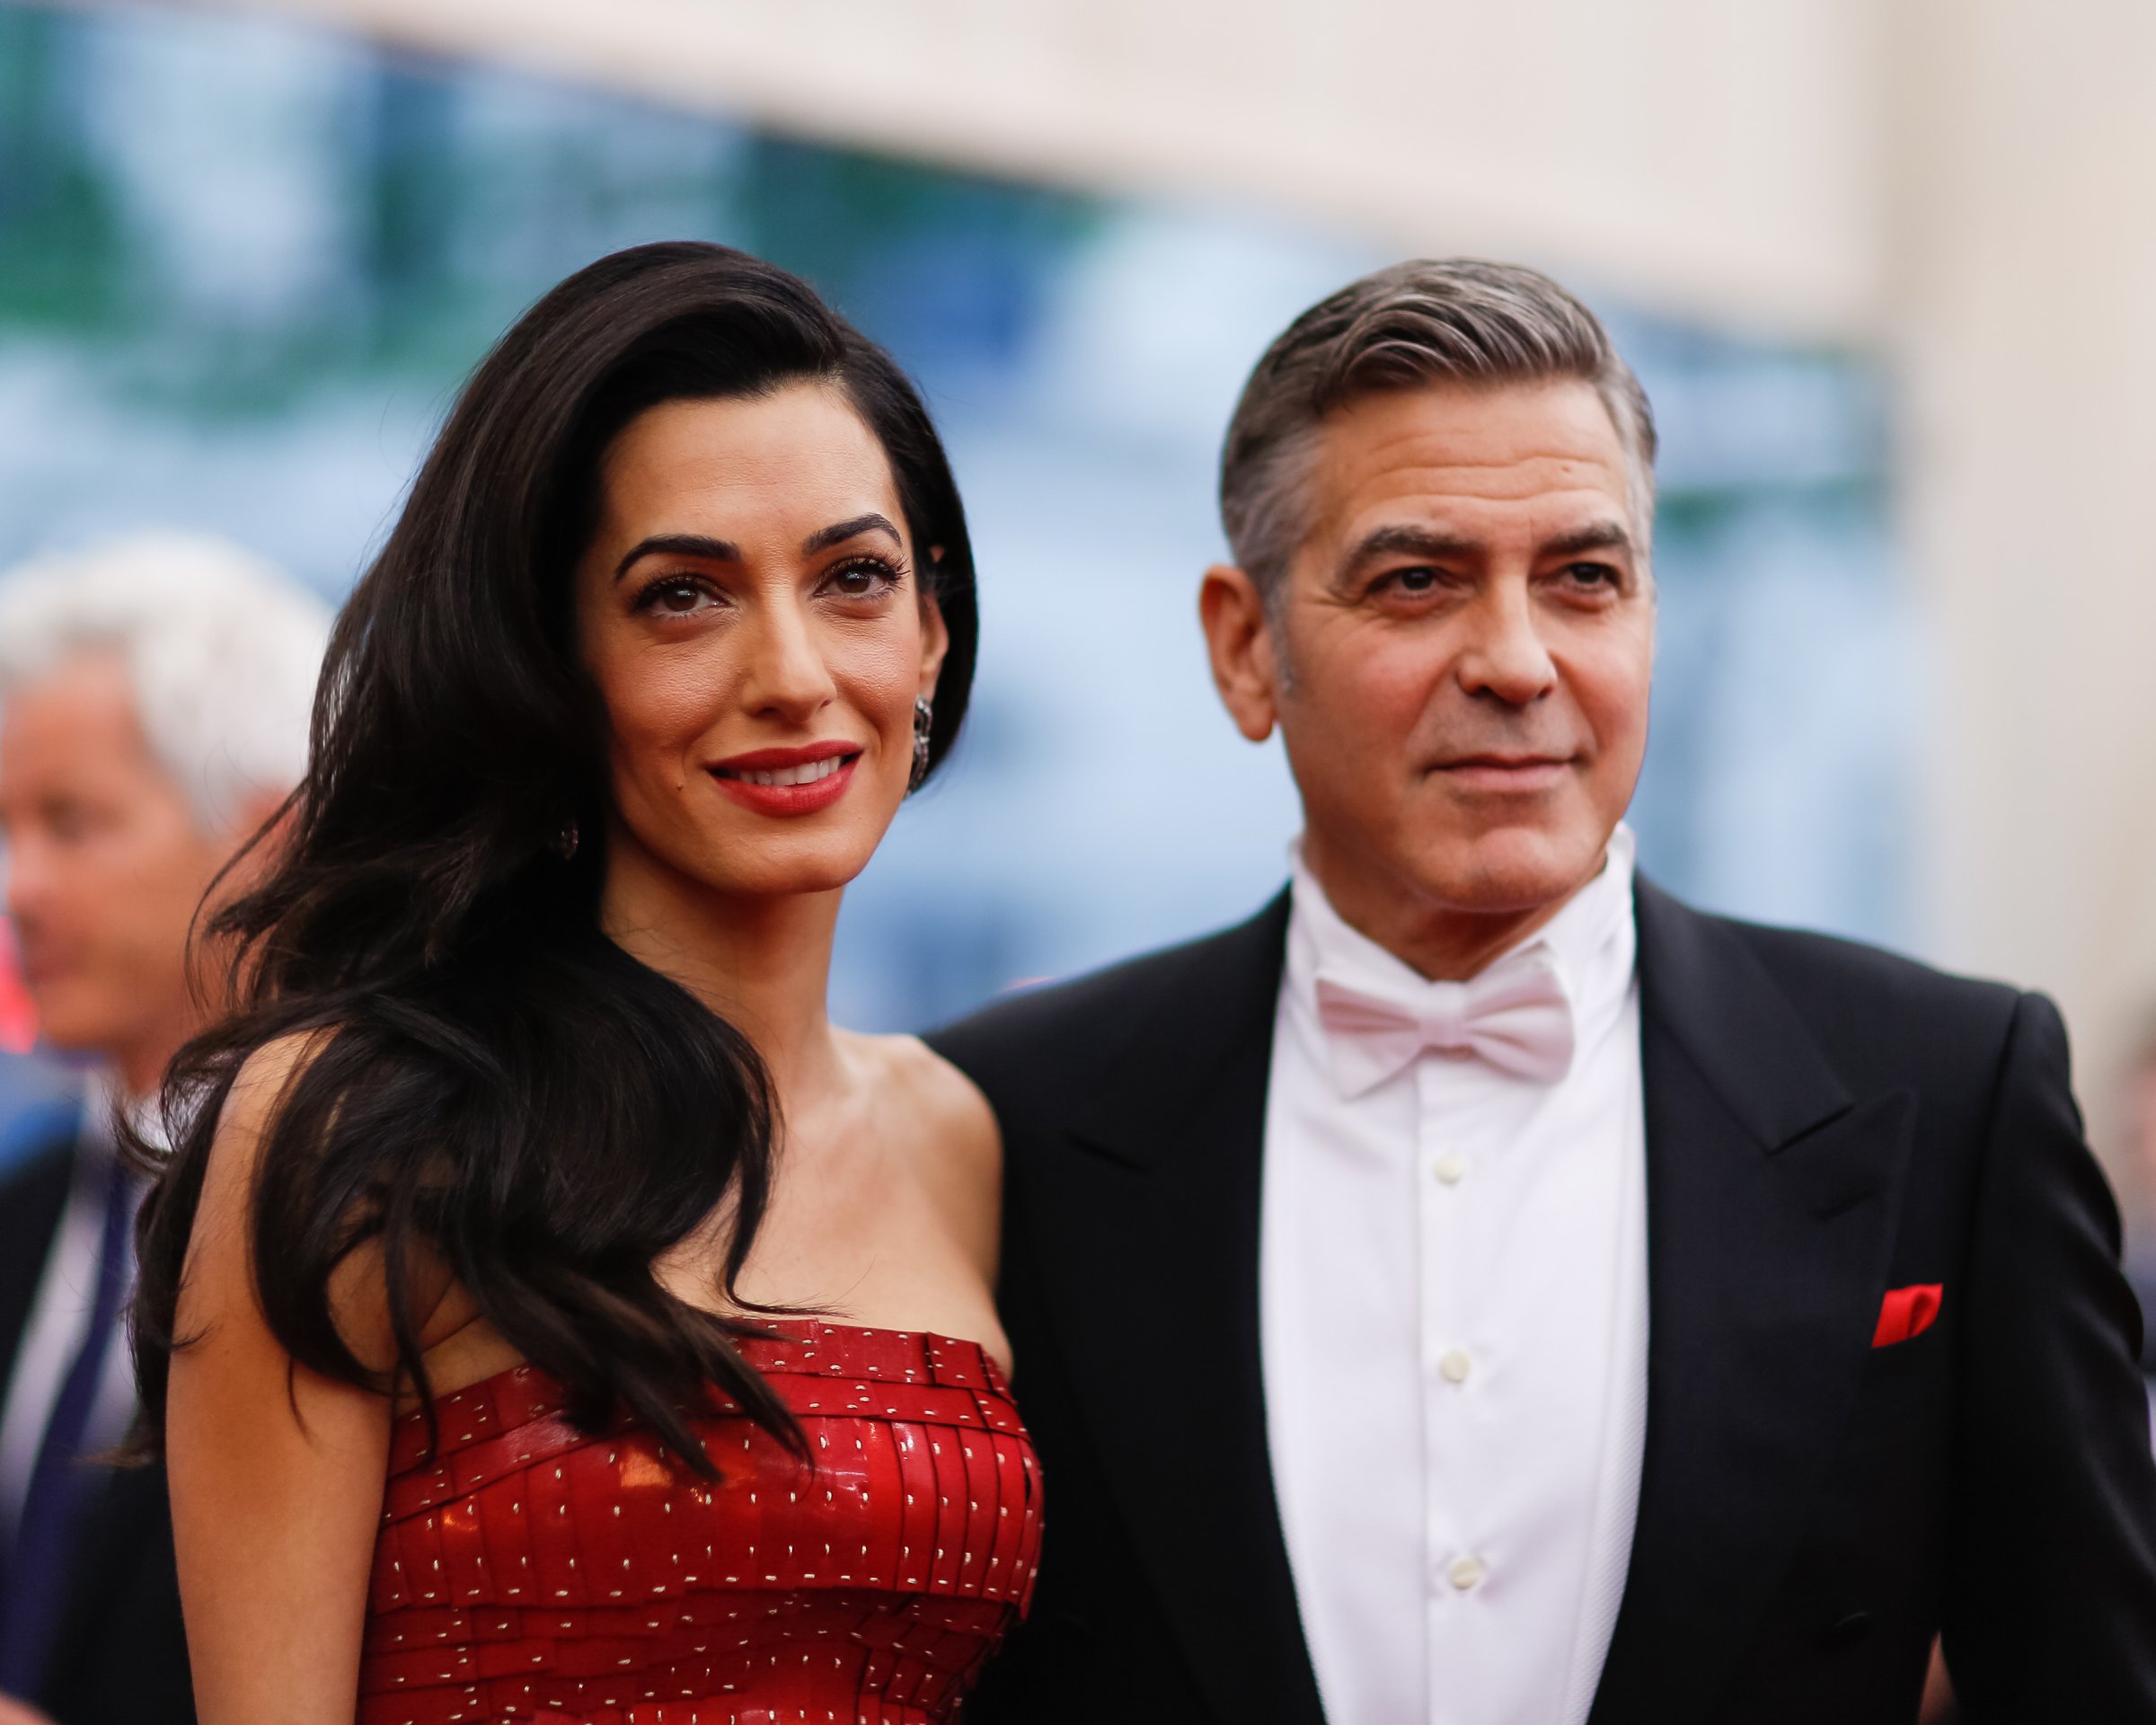 George Clooney and Amal Alamuddin attend the Met Gala in New York City on May 4, 2015.